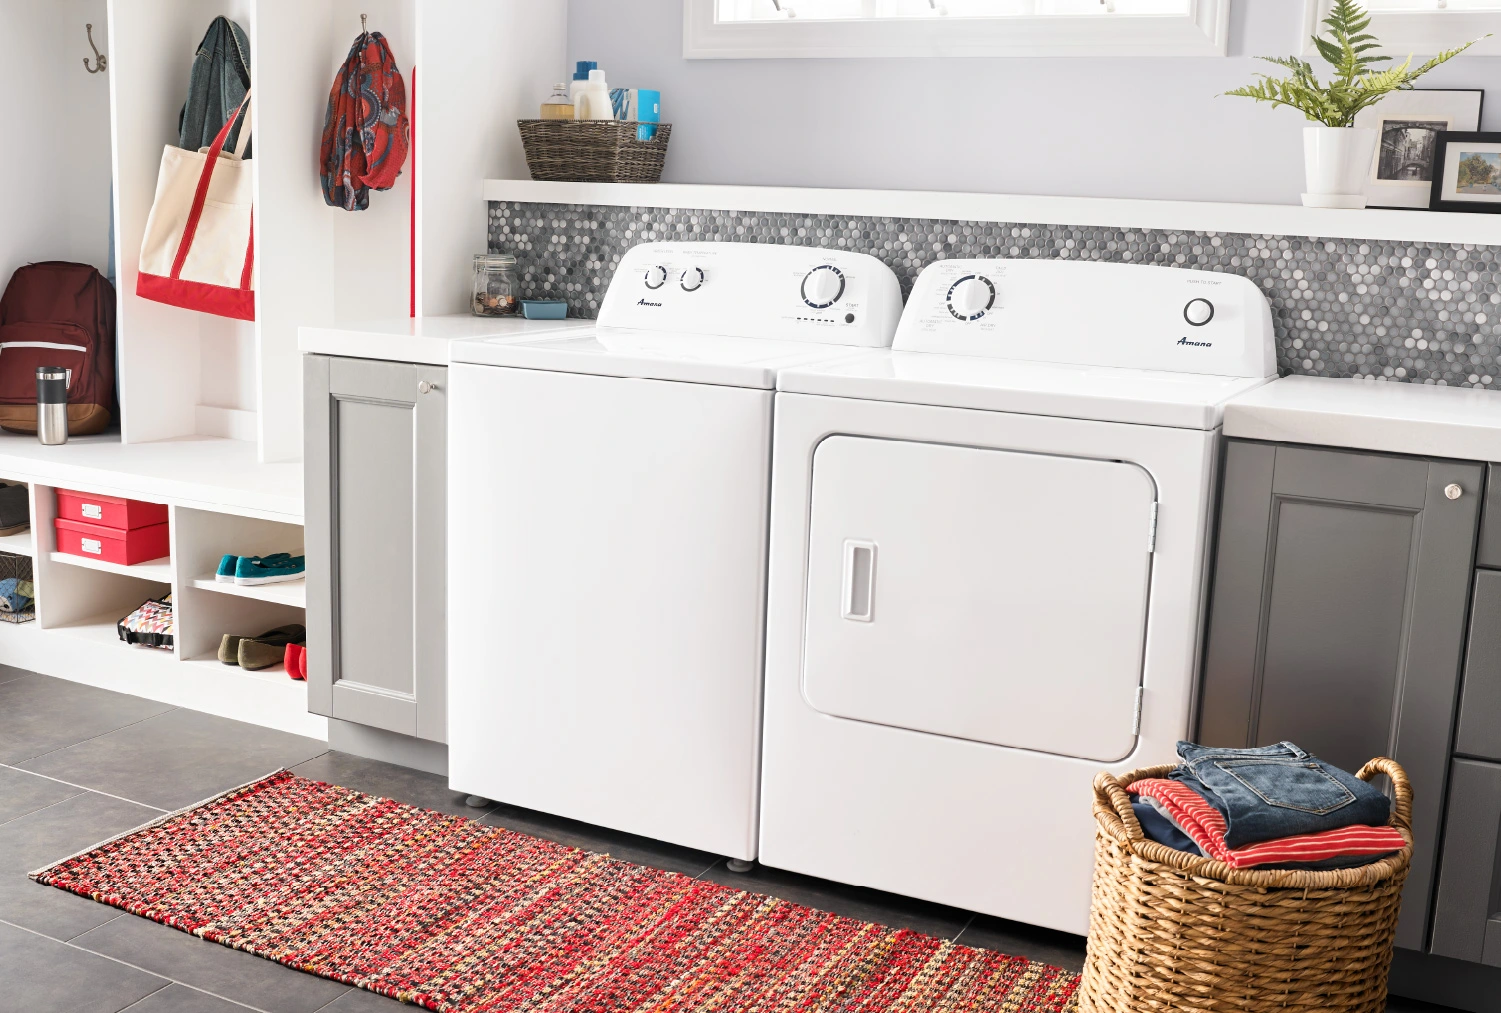 Laundry room makeover ideas for your home, featuring a white washer and dryer set with plenty of laundry room storage options.